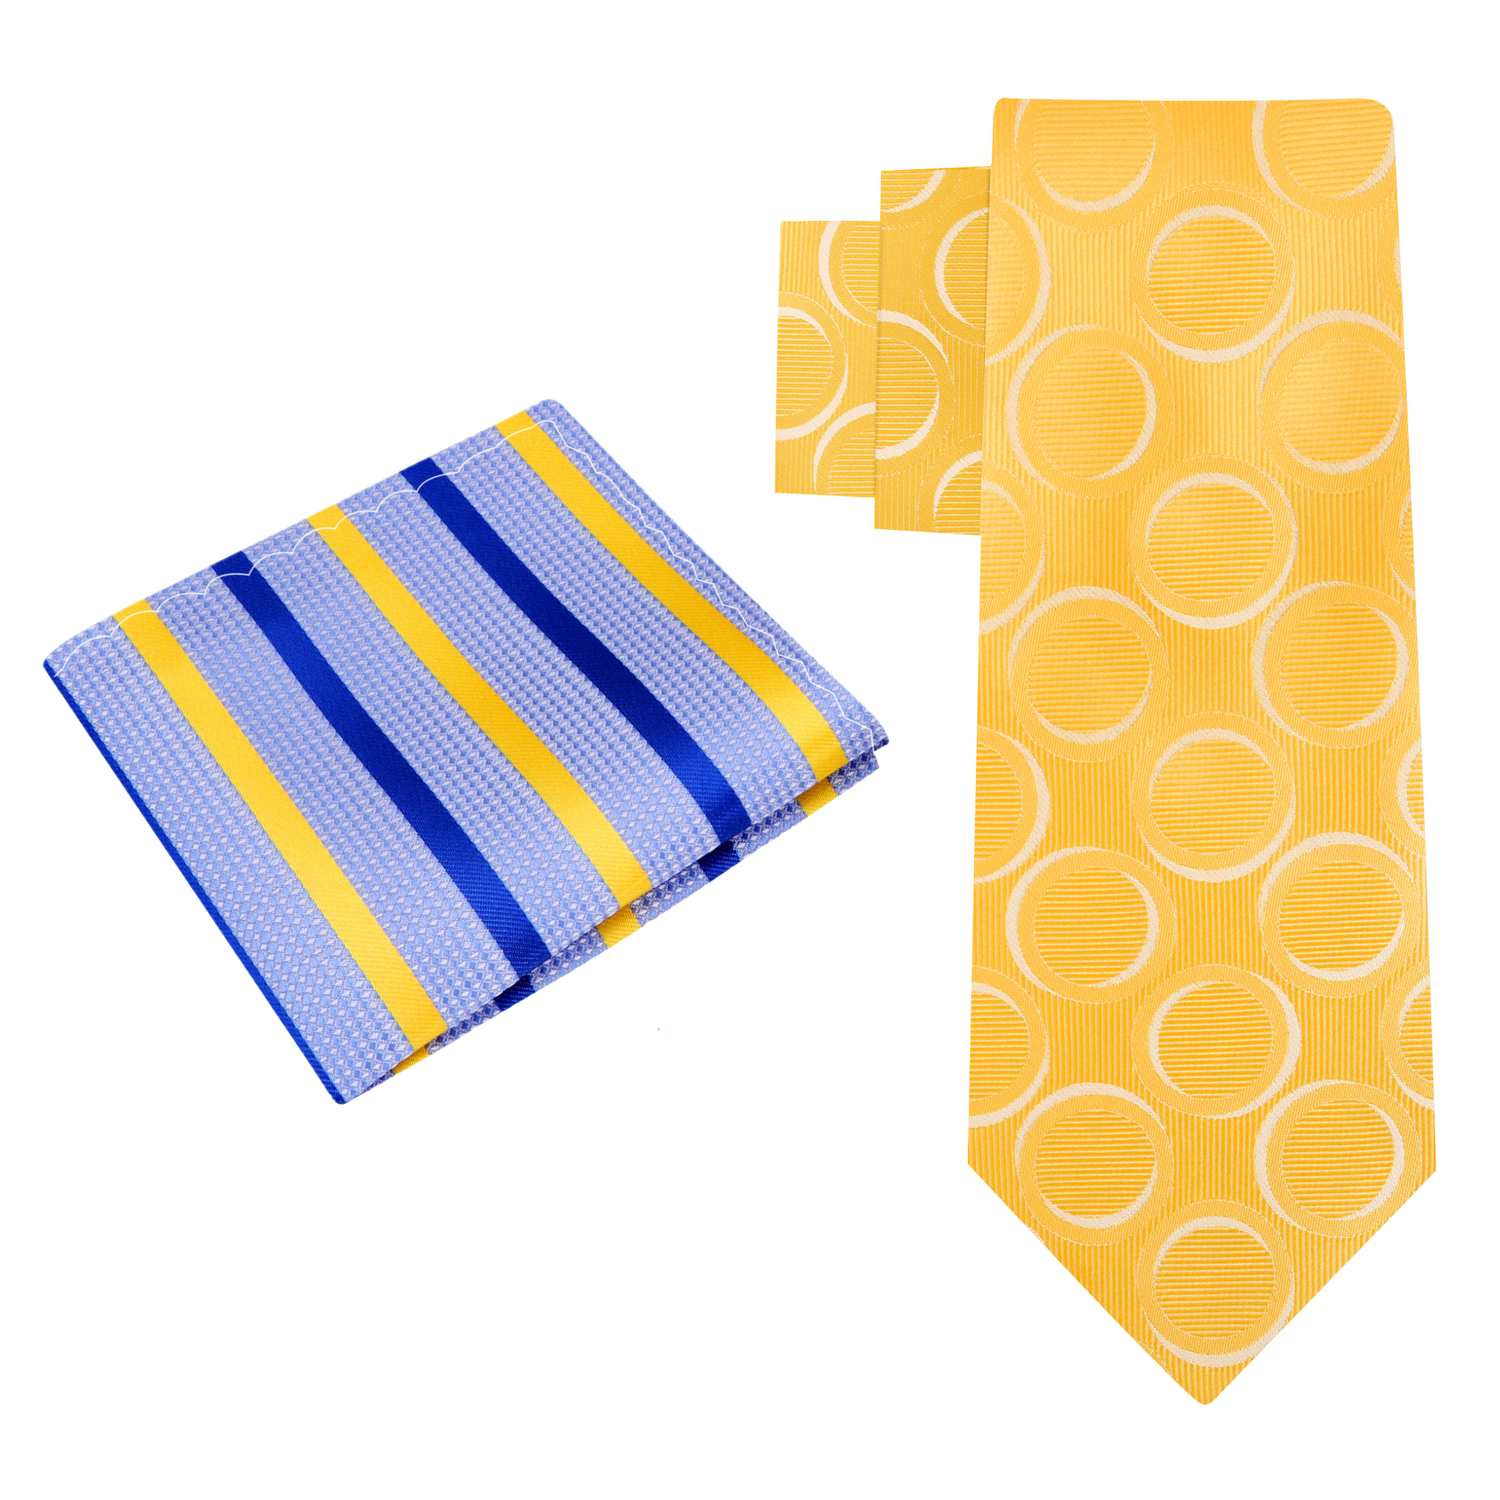 Alt View: Yellow and White Rings Necktie with Light Blue, Blue, Yellow Stripe Square